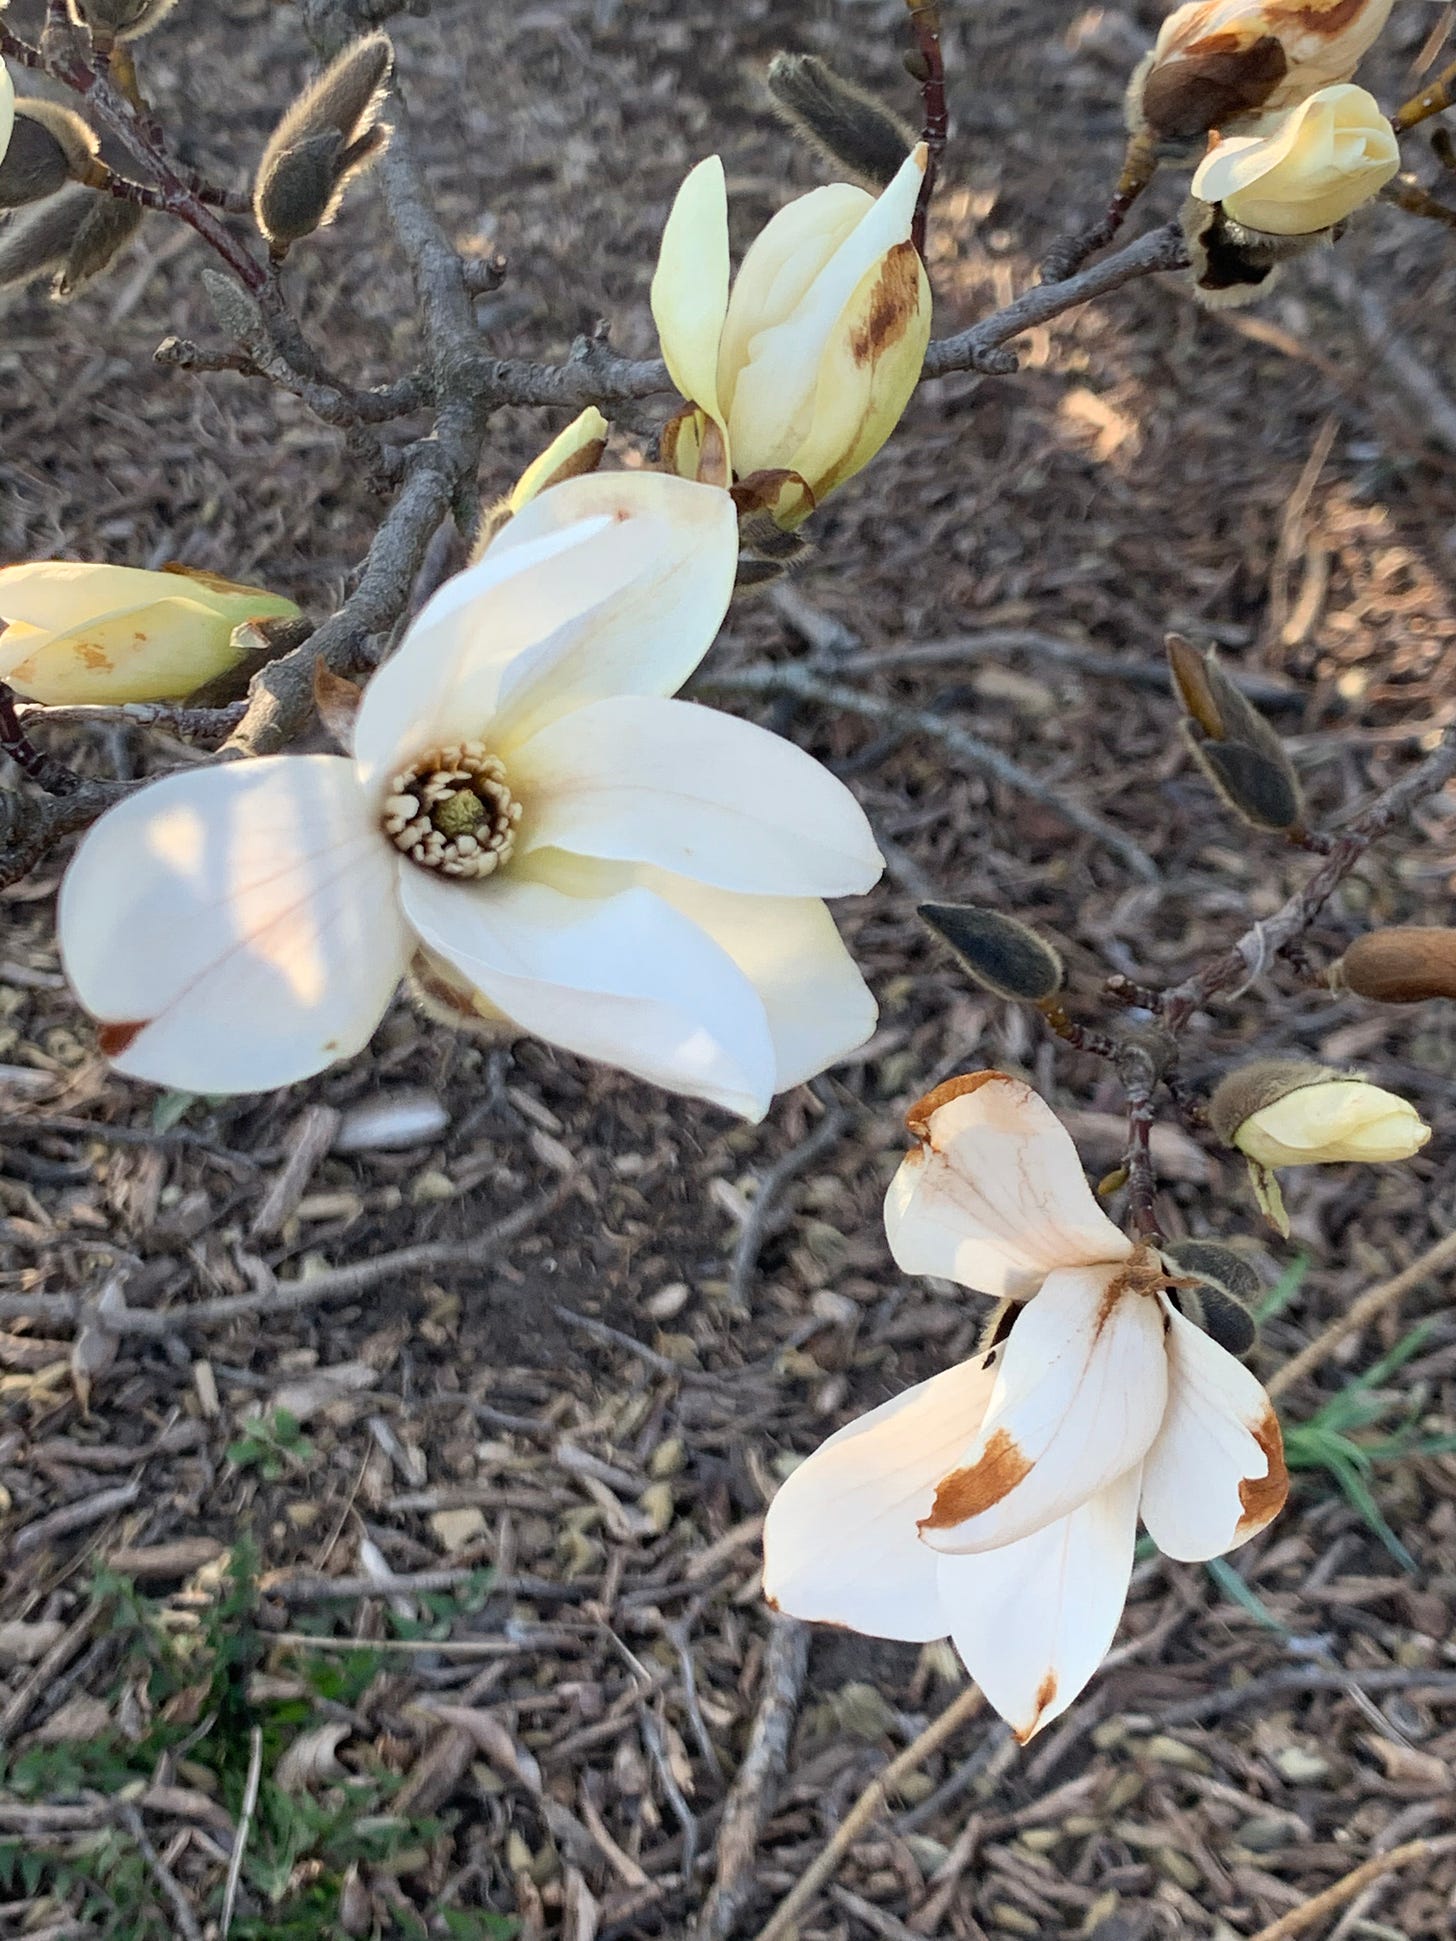 A white flower with only a handful of petals blooming out of a brown bud